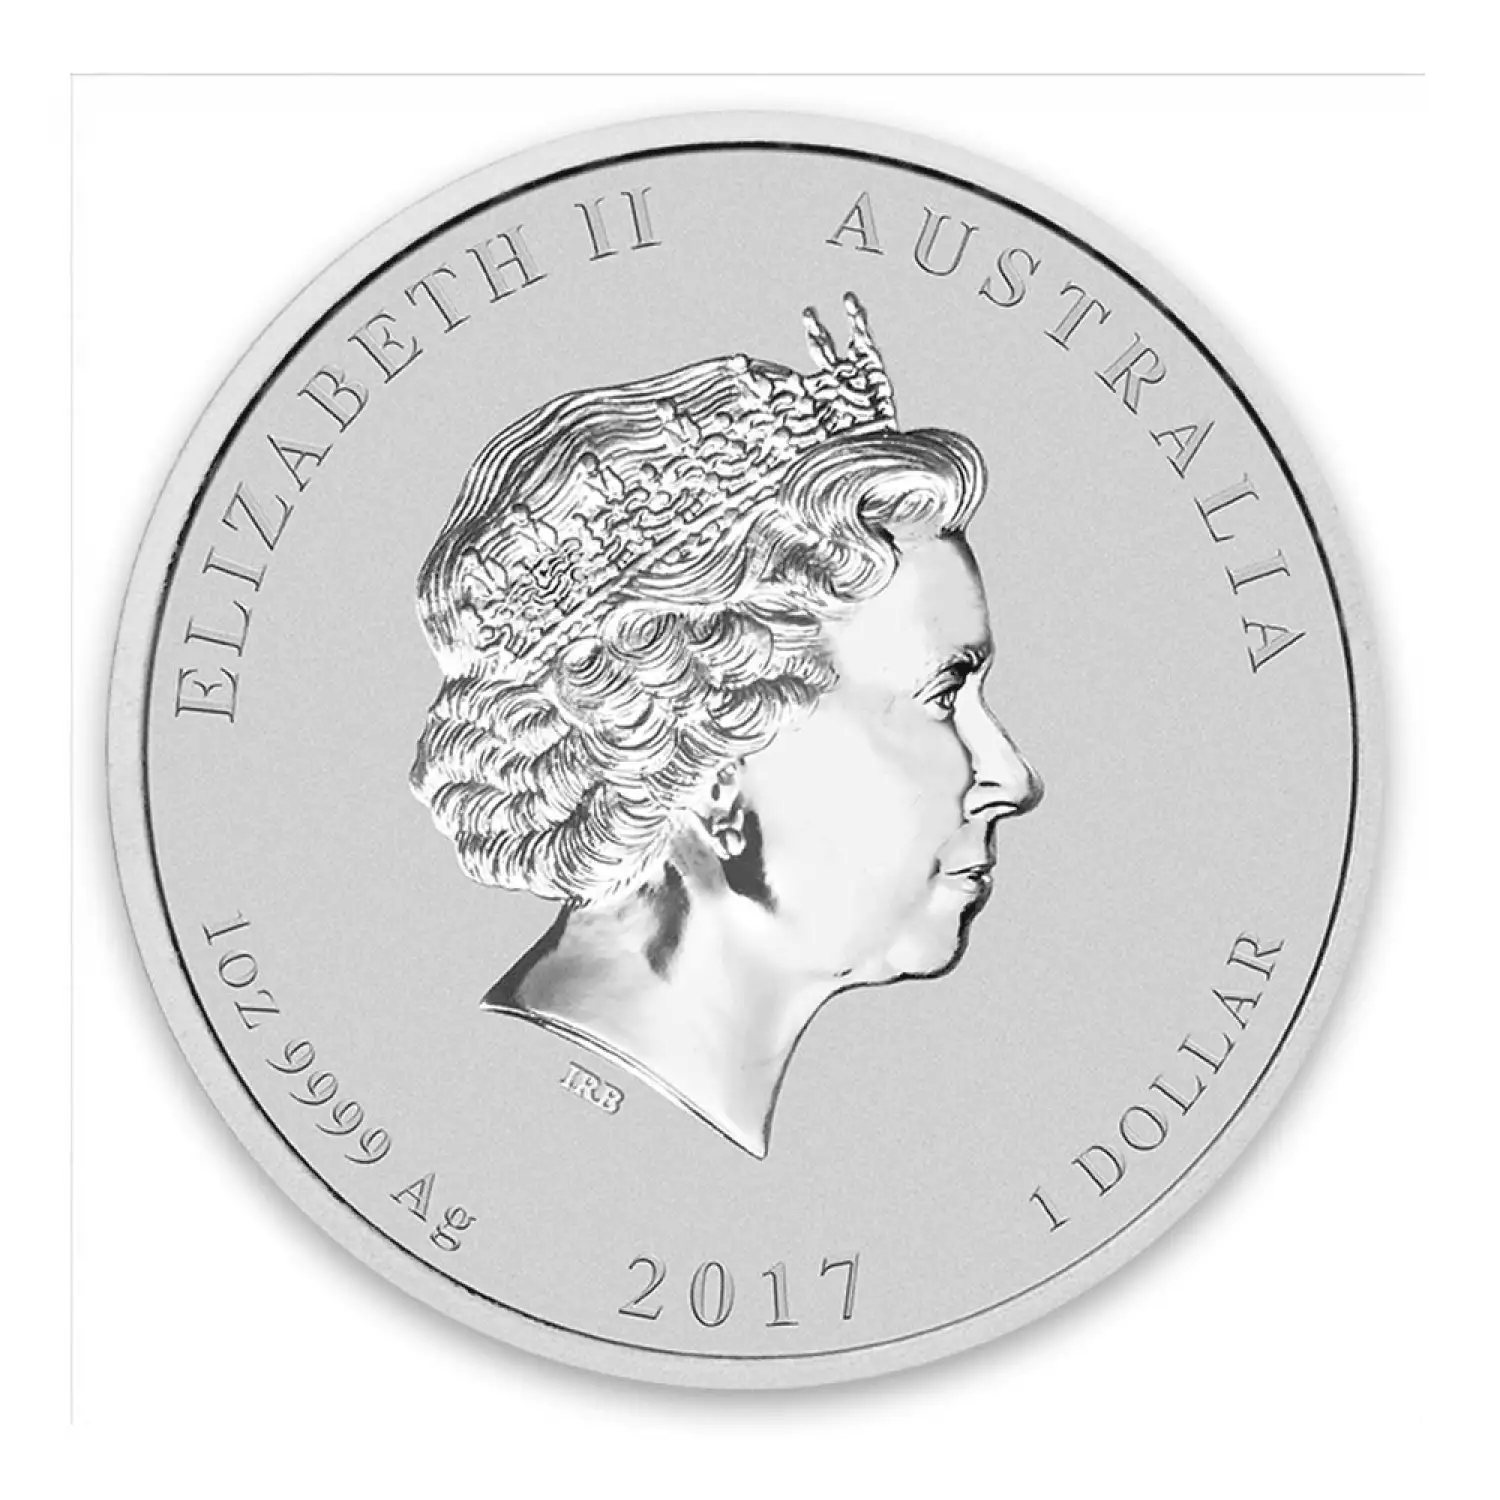 2017 1 oz Australian Perth Mint Silver Lunar II: Year of the Rooster (2)